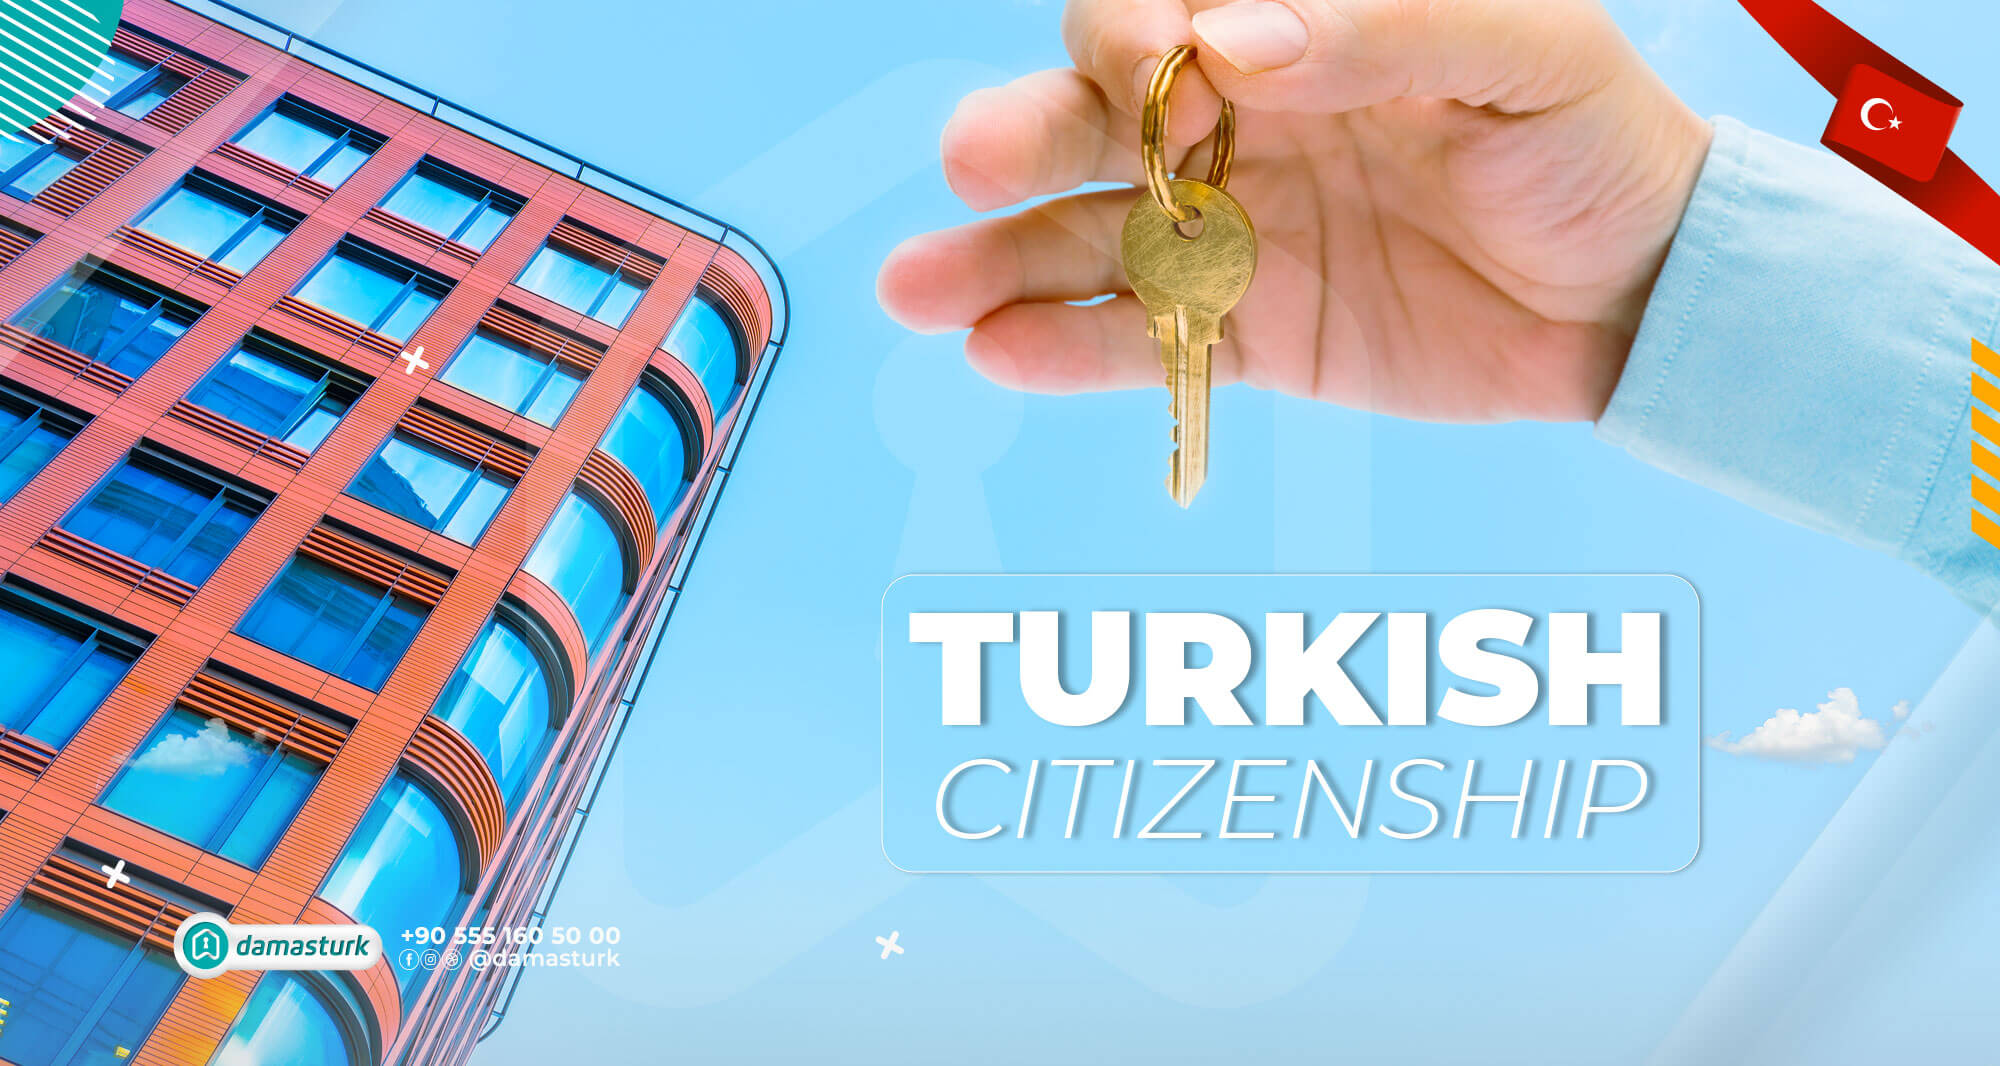 How to Get a Turkish Citizenship by Purchasing a Land parcel? A Complete Guide